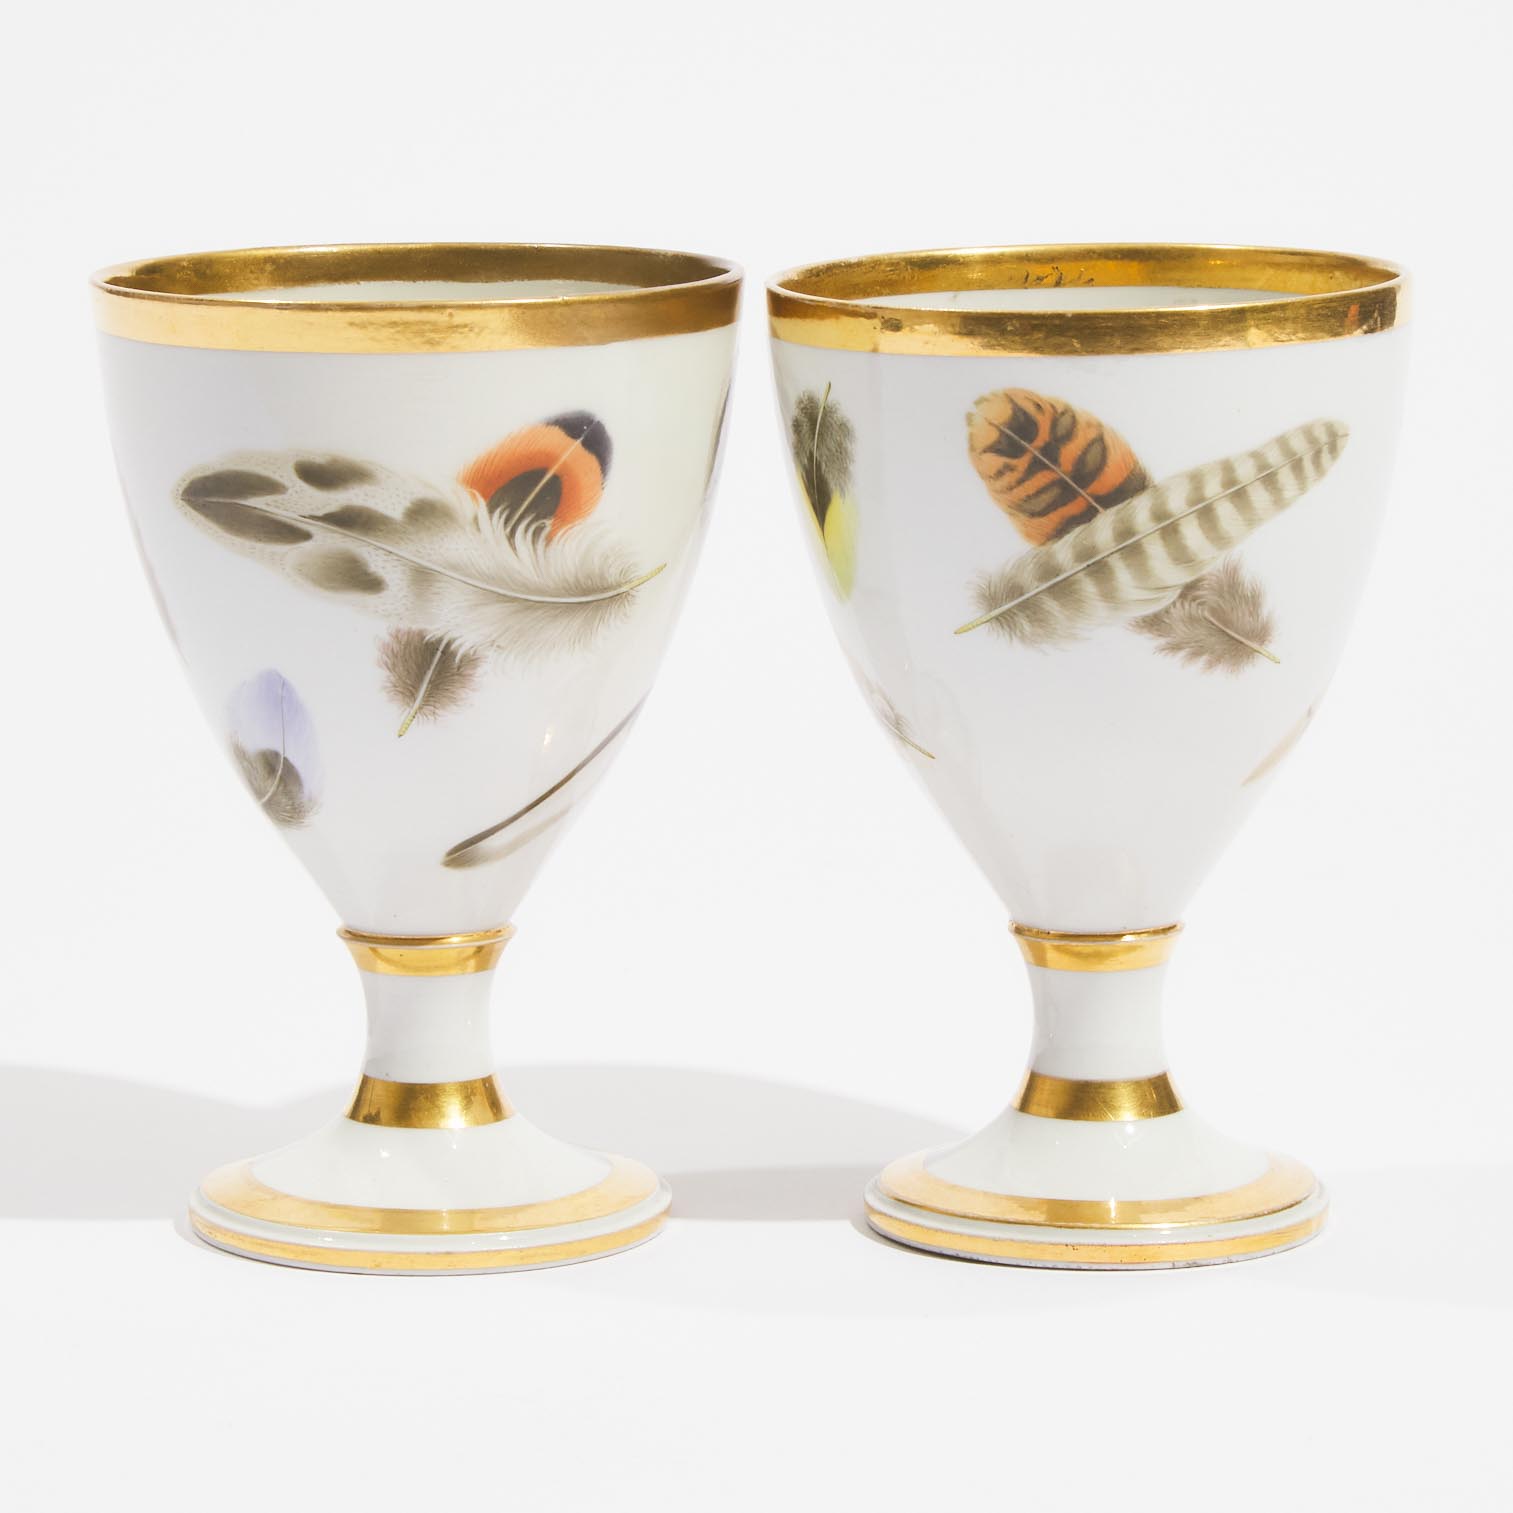 Pair of Barr, Flight & Barr Worcester Feather Painted Goblets, c.1804-13